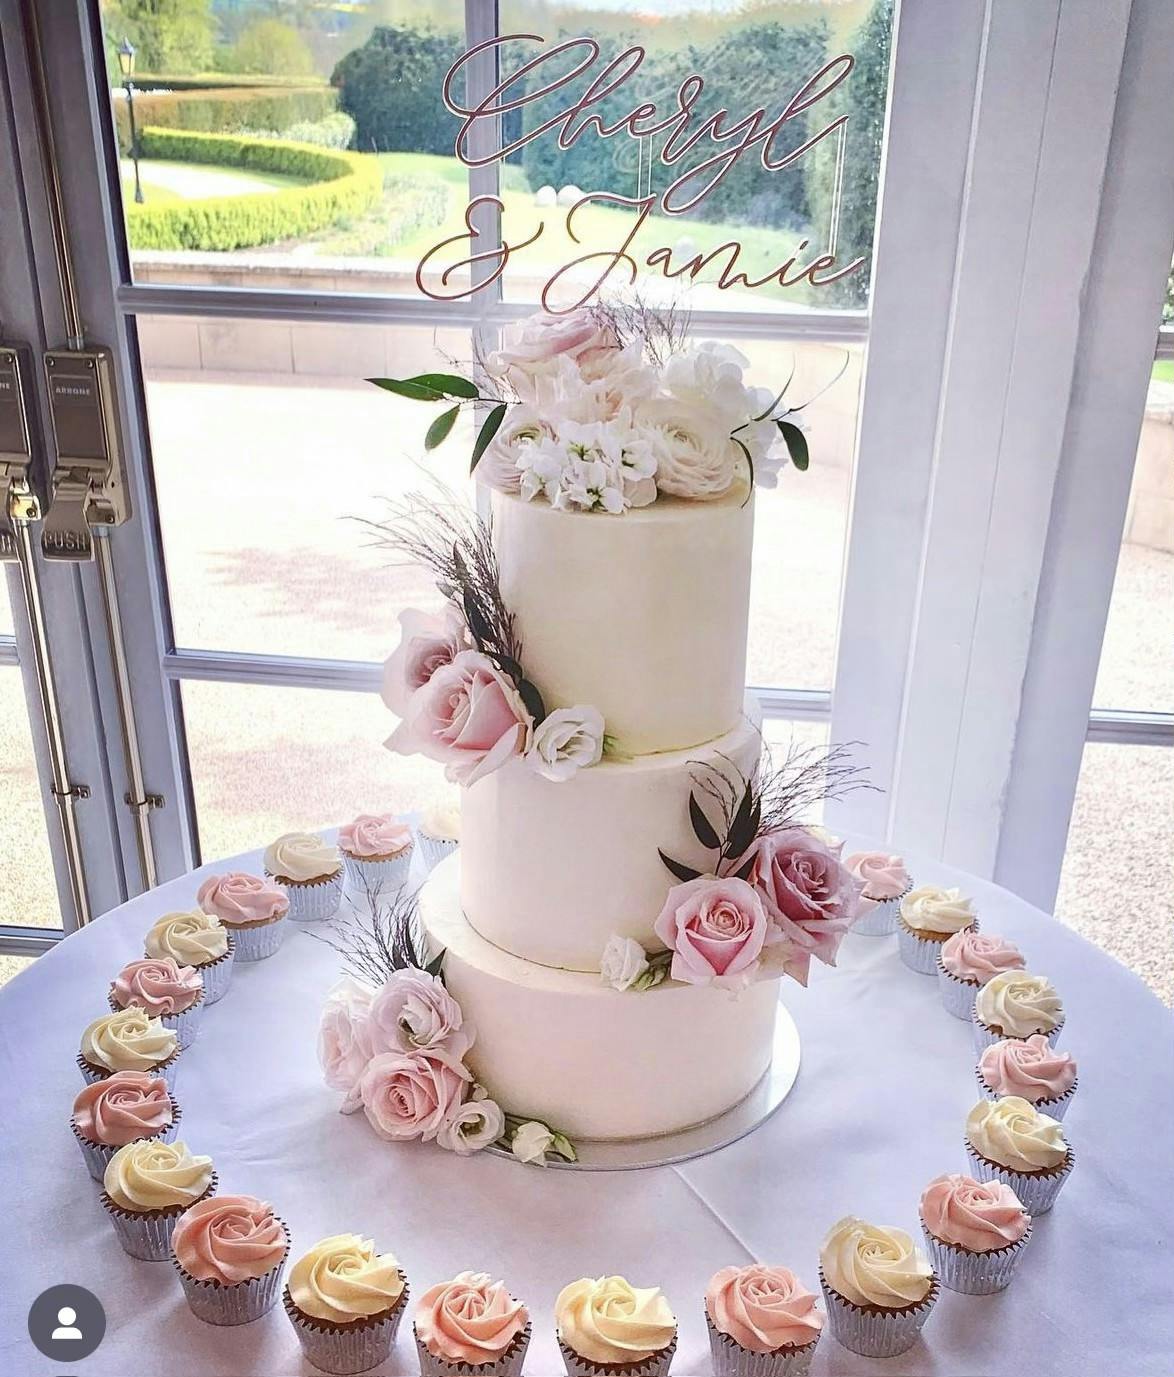 Light pink wedding cake with pink and white flowers surrounded by pink cupcakes for Cheryl and Jamie